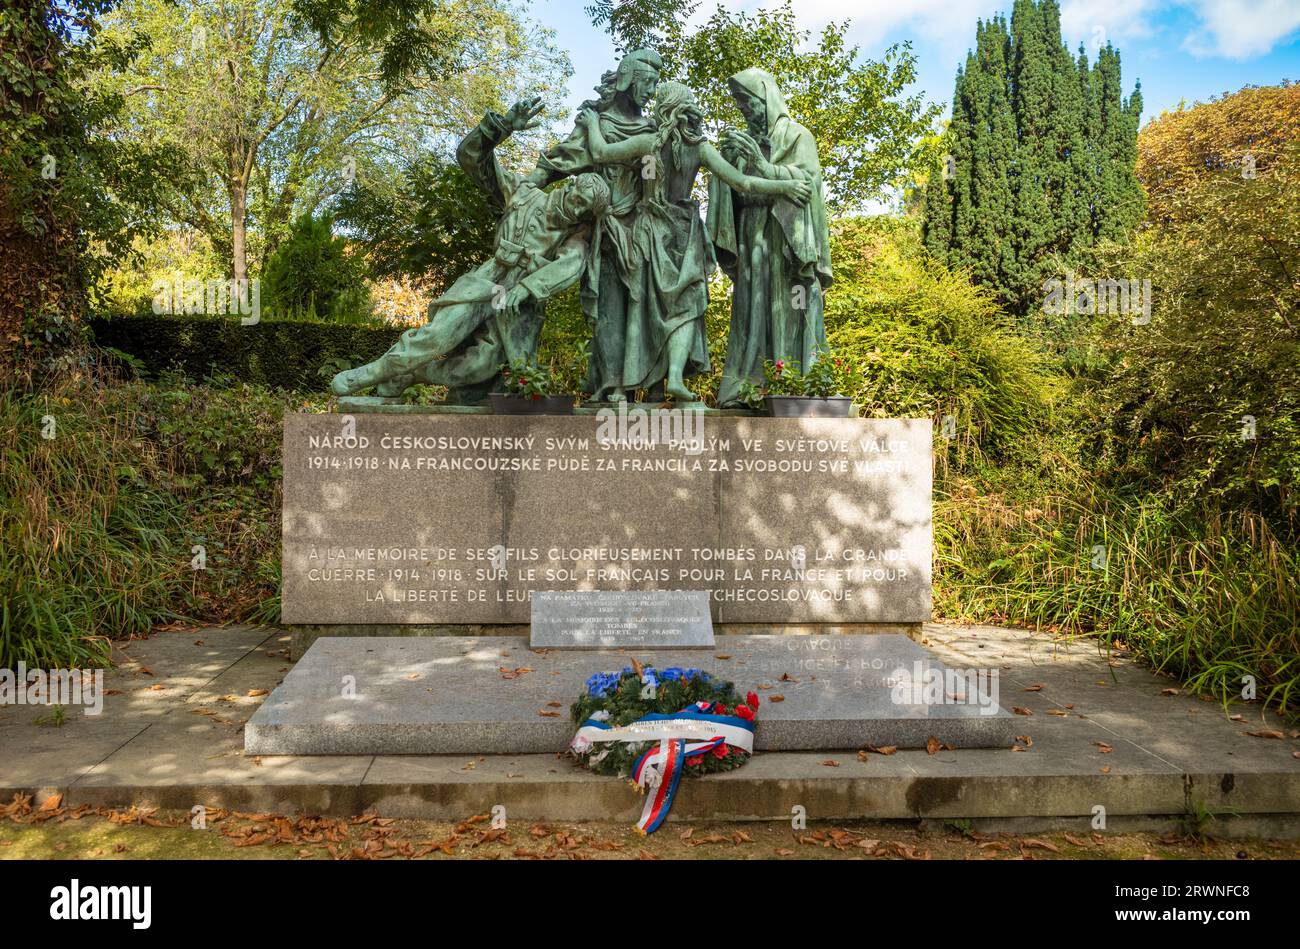 The monument in Pere Lachaise Cemetery in Paris, France, to Czechoslovakian soldiers who died in France during WW1. It features the French allegorical Stock Photo